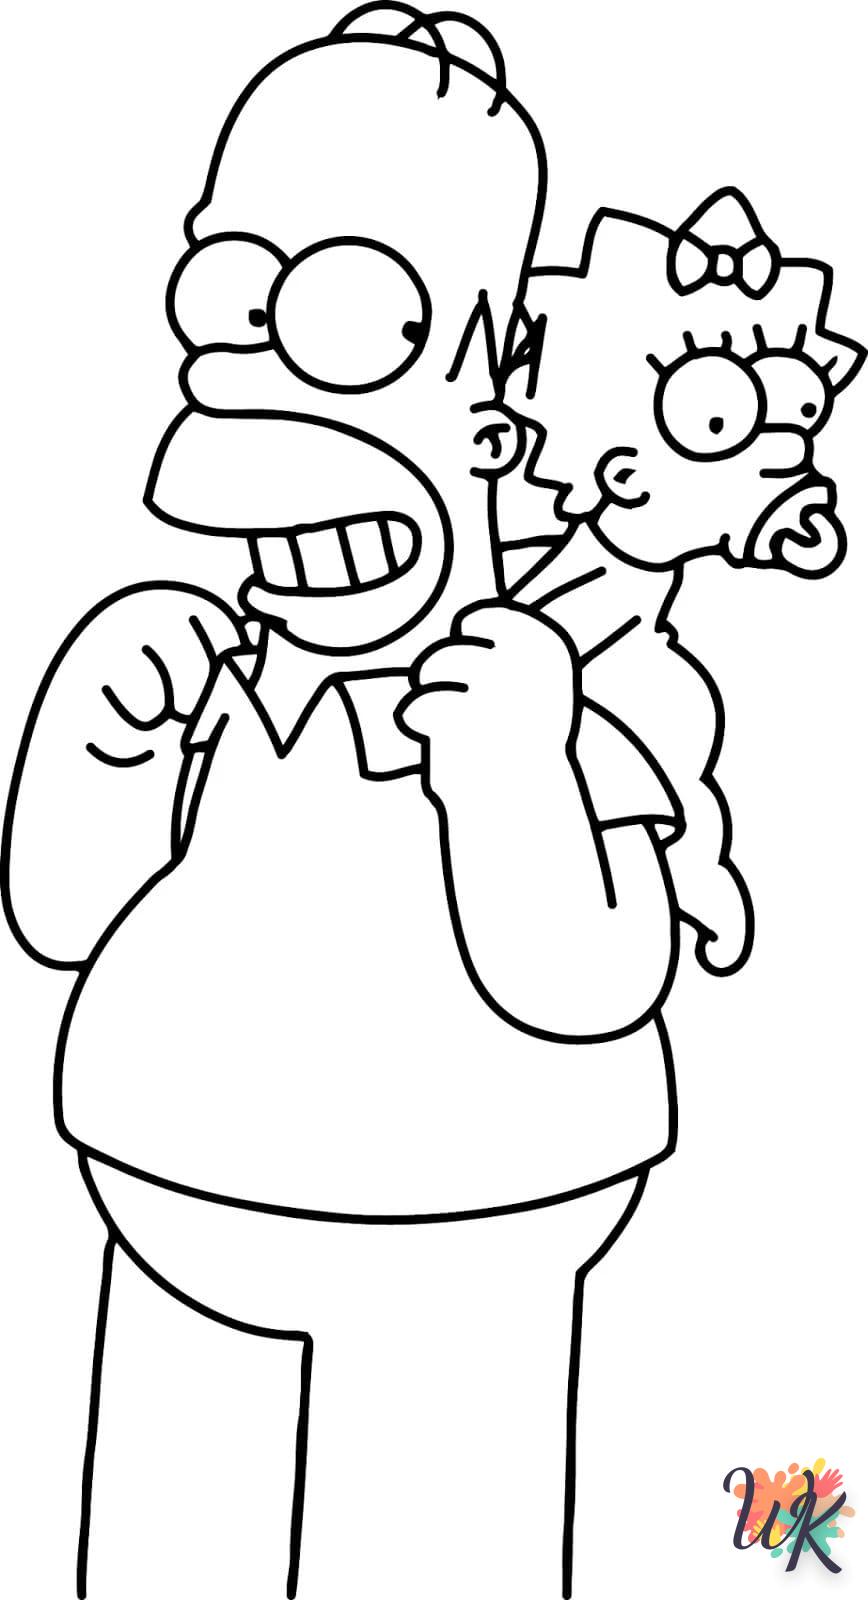 Coloriage Simpsons 74